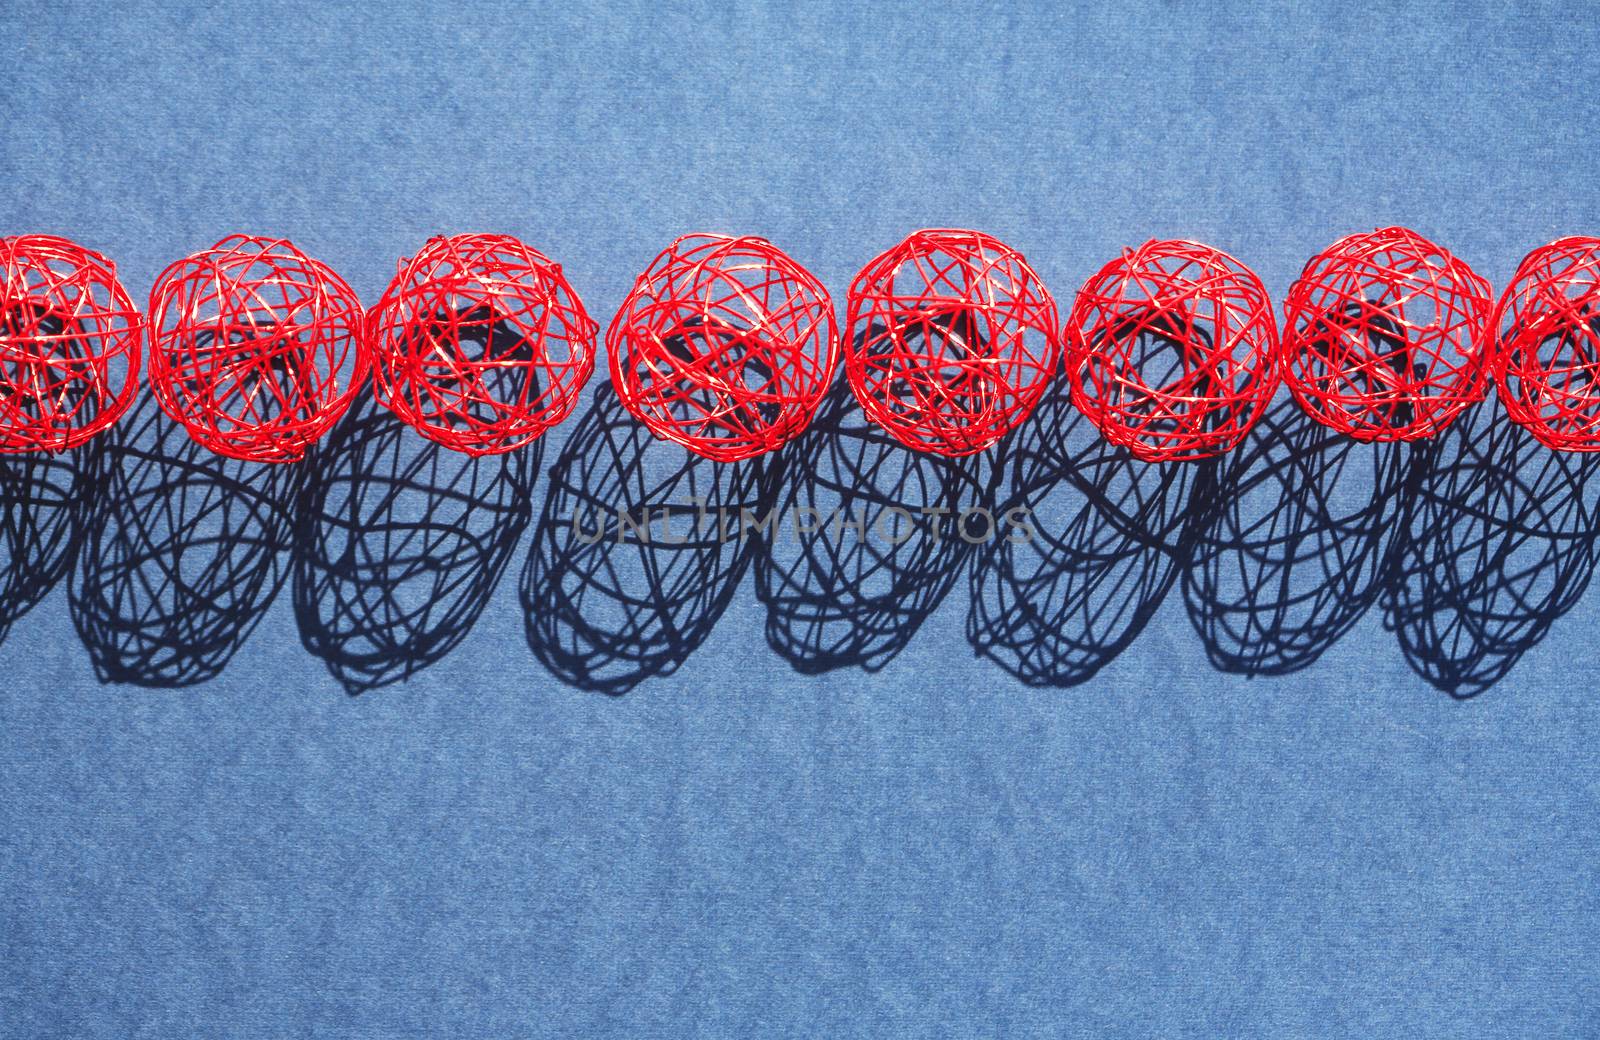 Set of red balls made from wire in a row against sun light